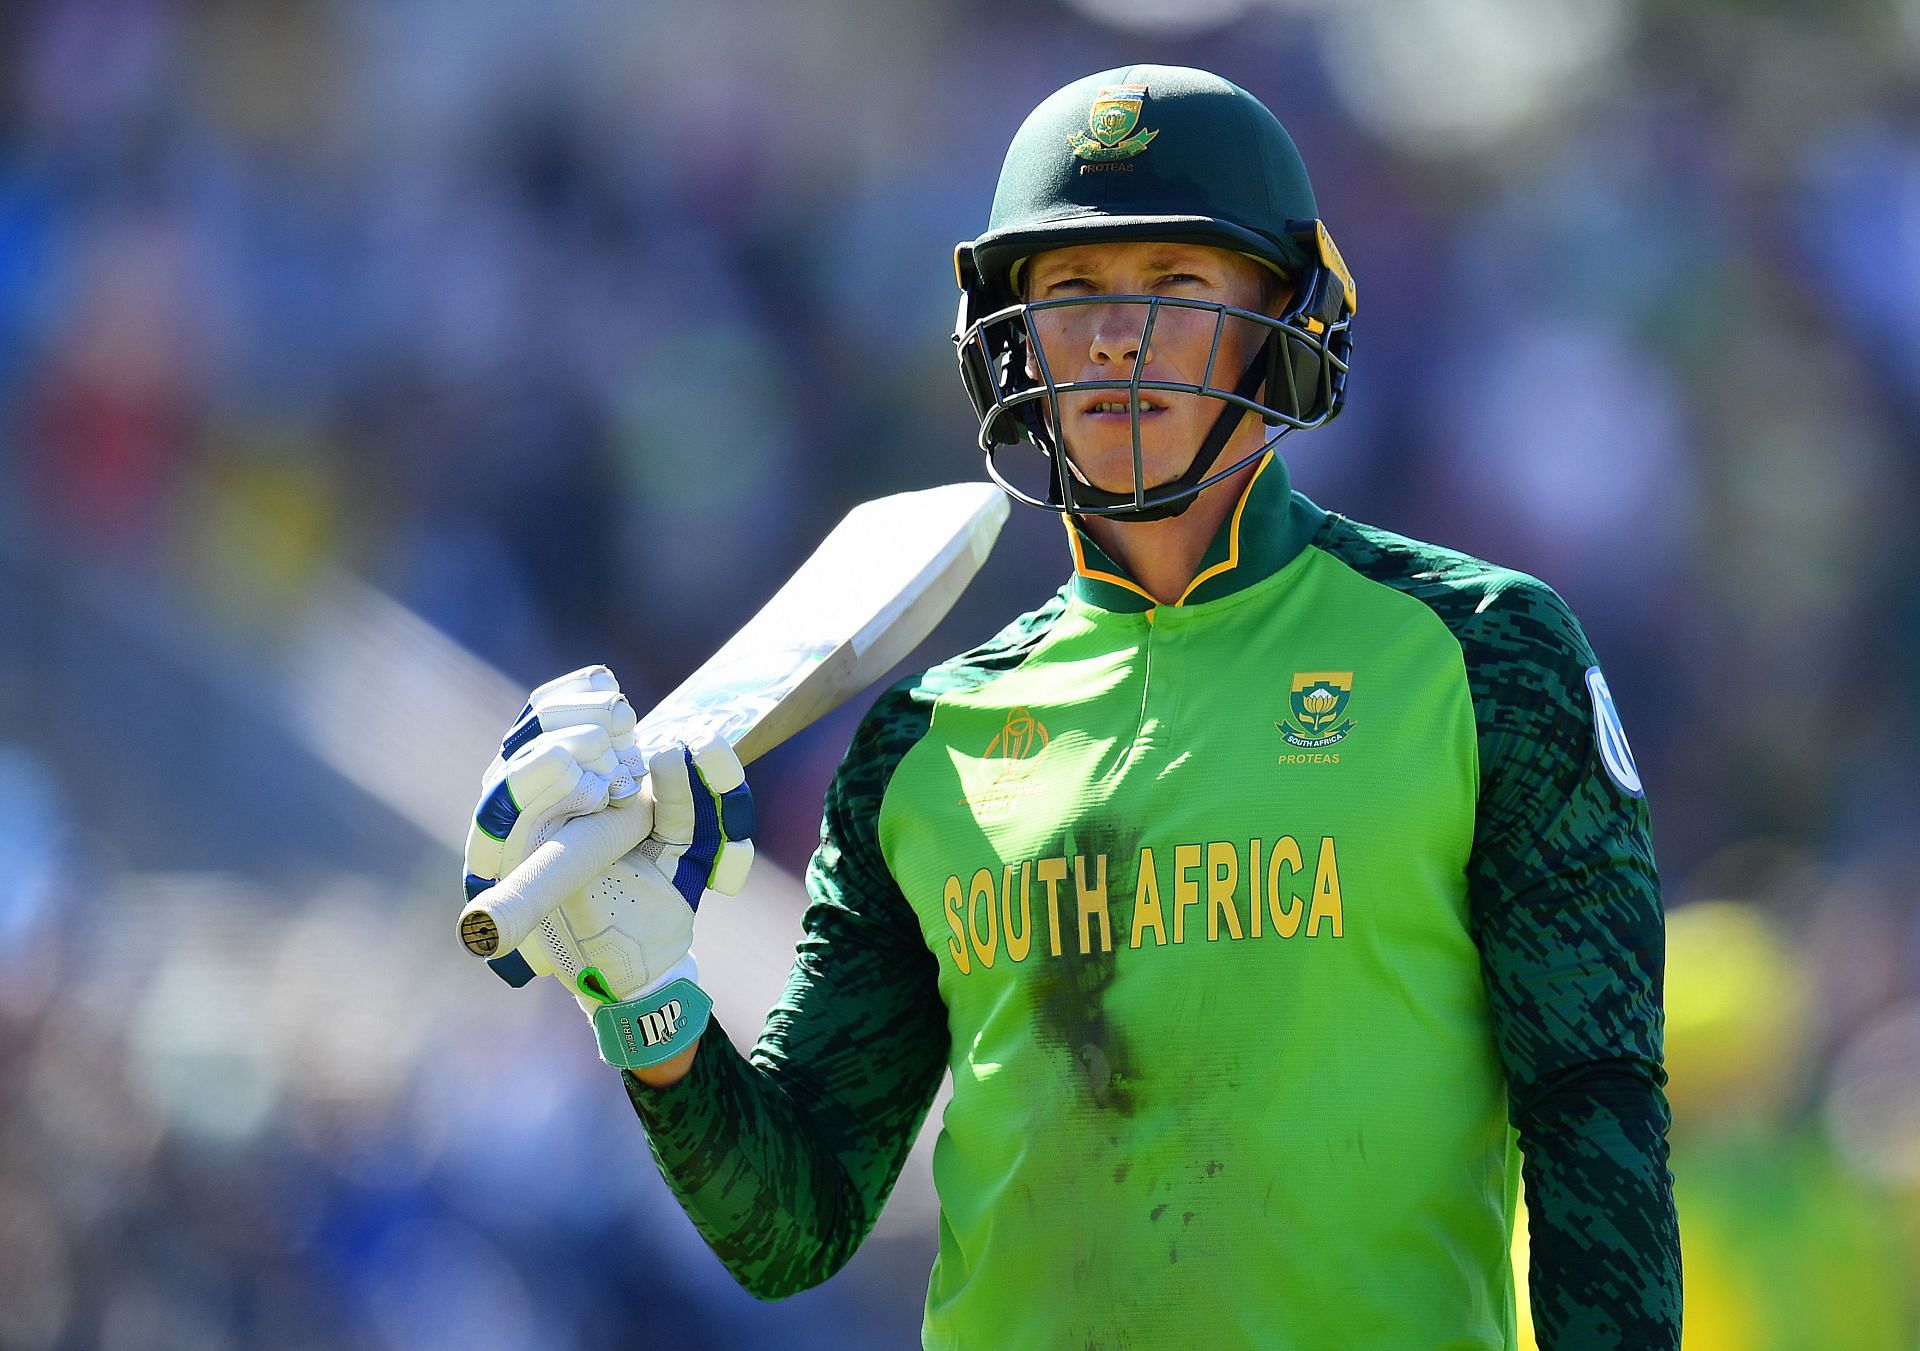 Australia v South Africa - ICC Cricket World Cup 2019 (Image: Getty)